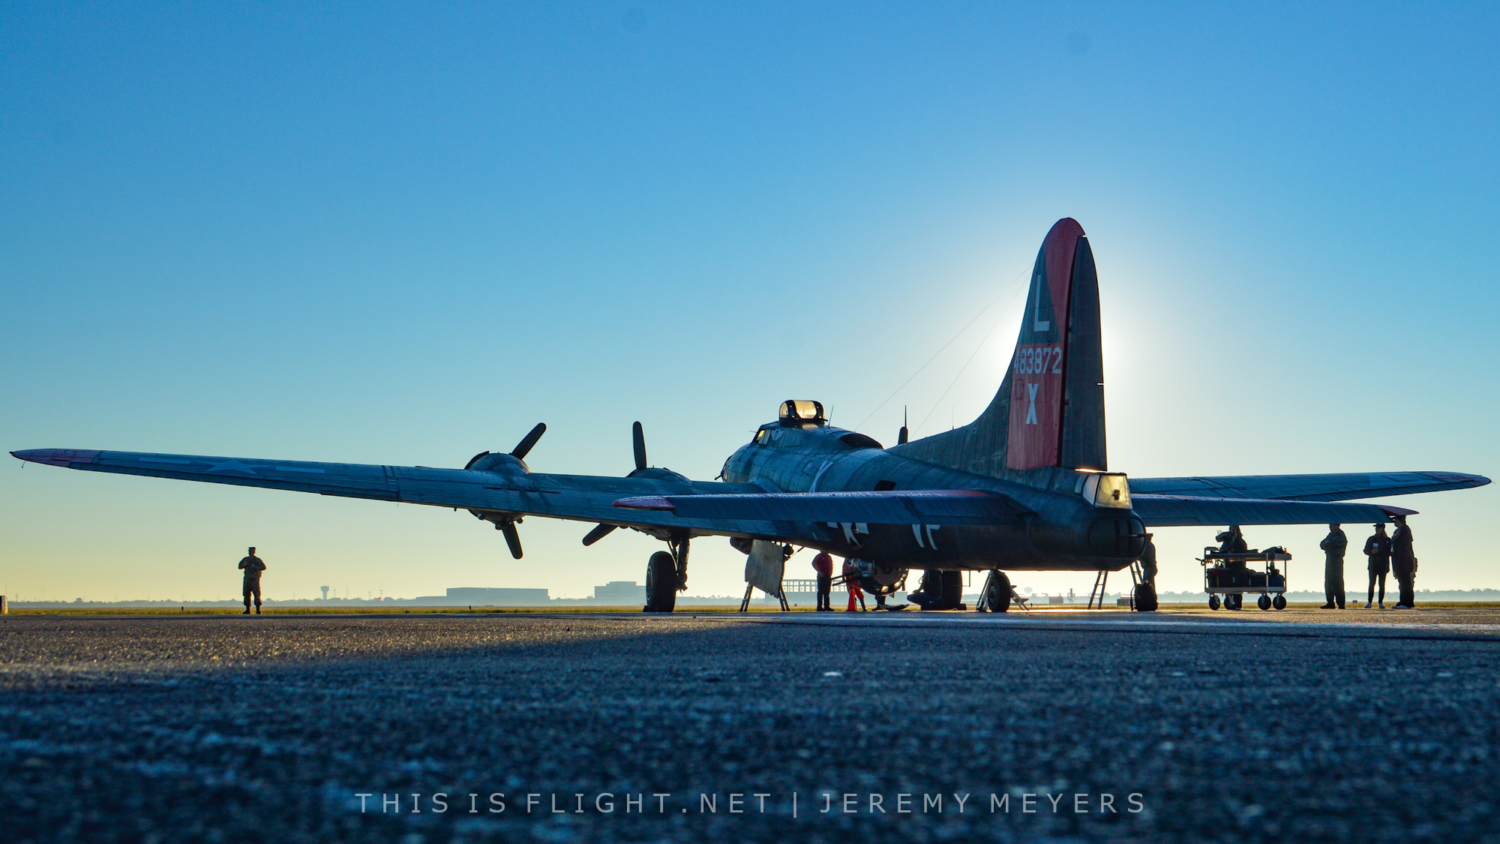 FAA B-17 Airworthiness Directive released; UK B-17 also grounded